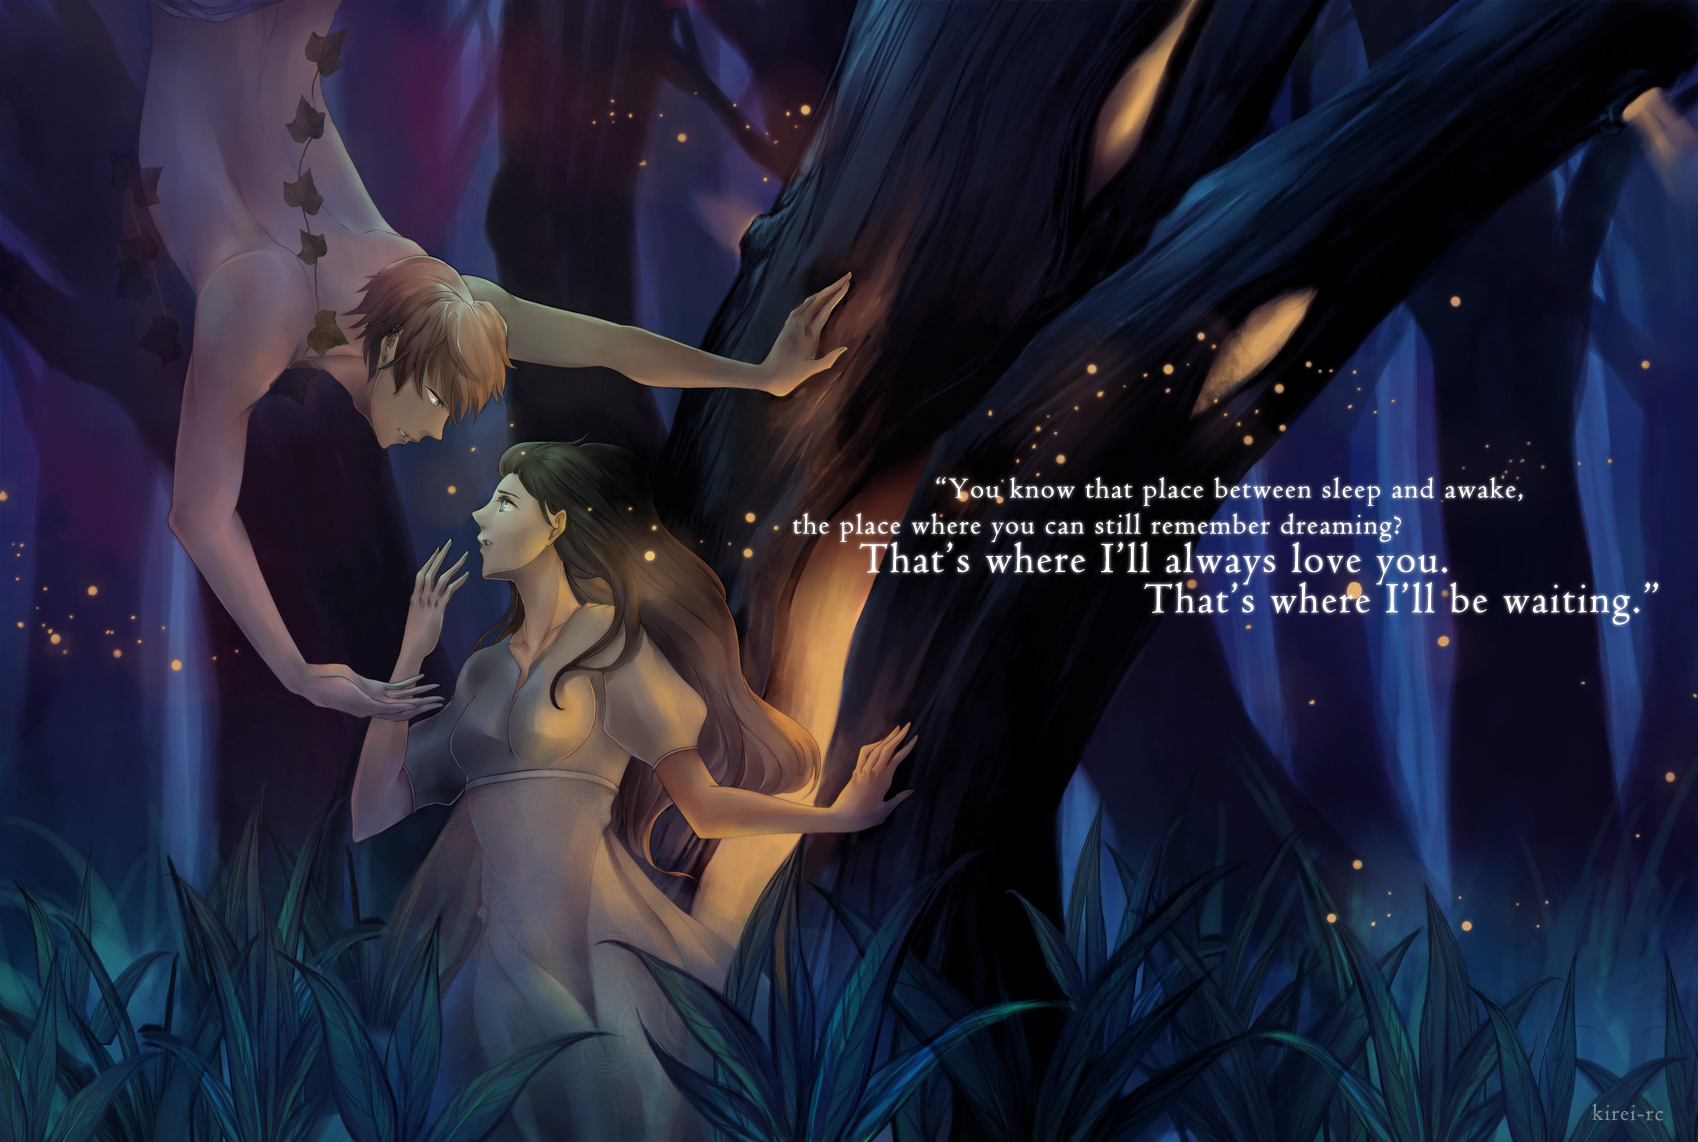 peter pan and wendy quotes tumblr